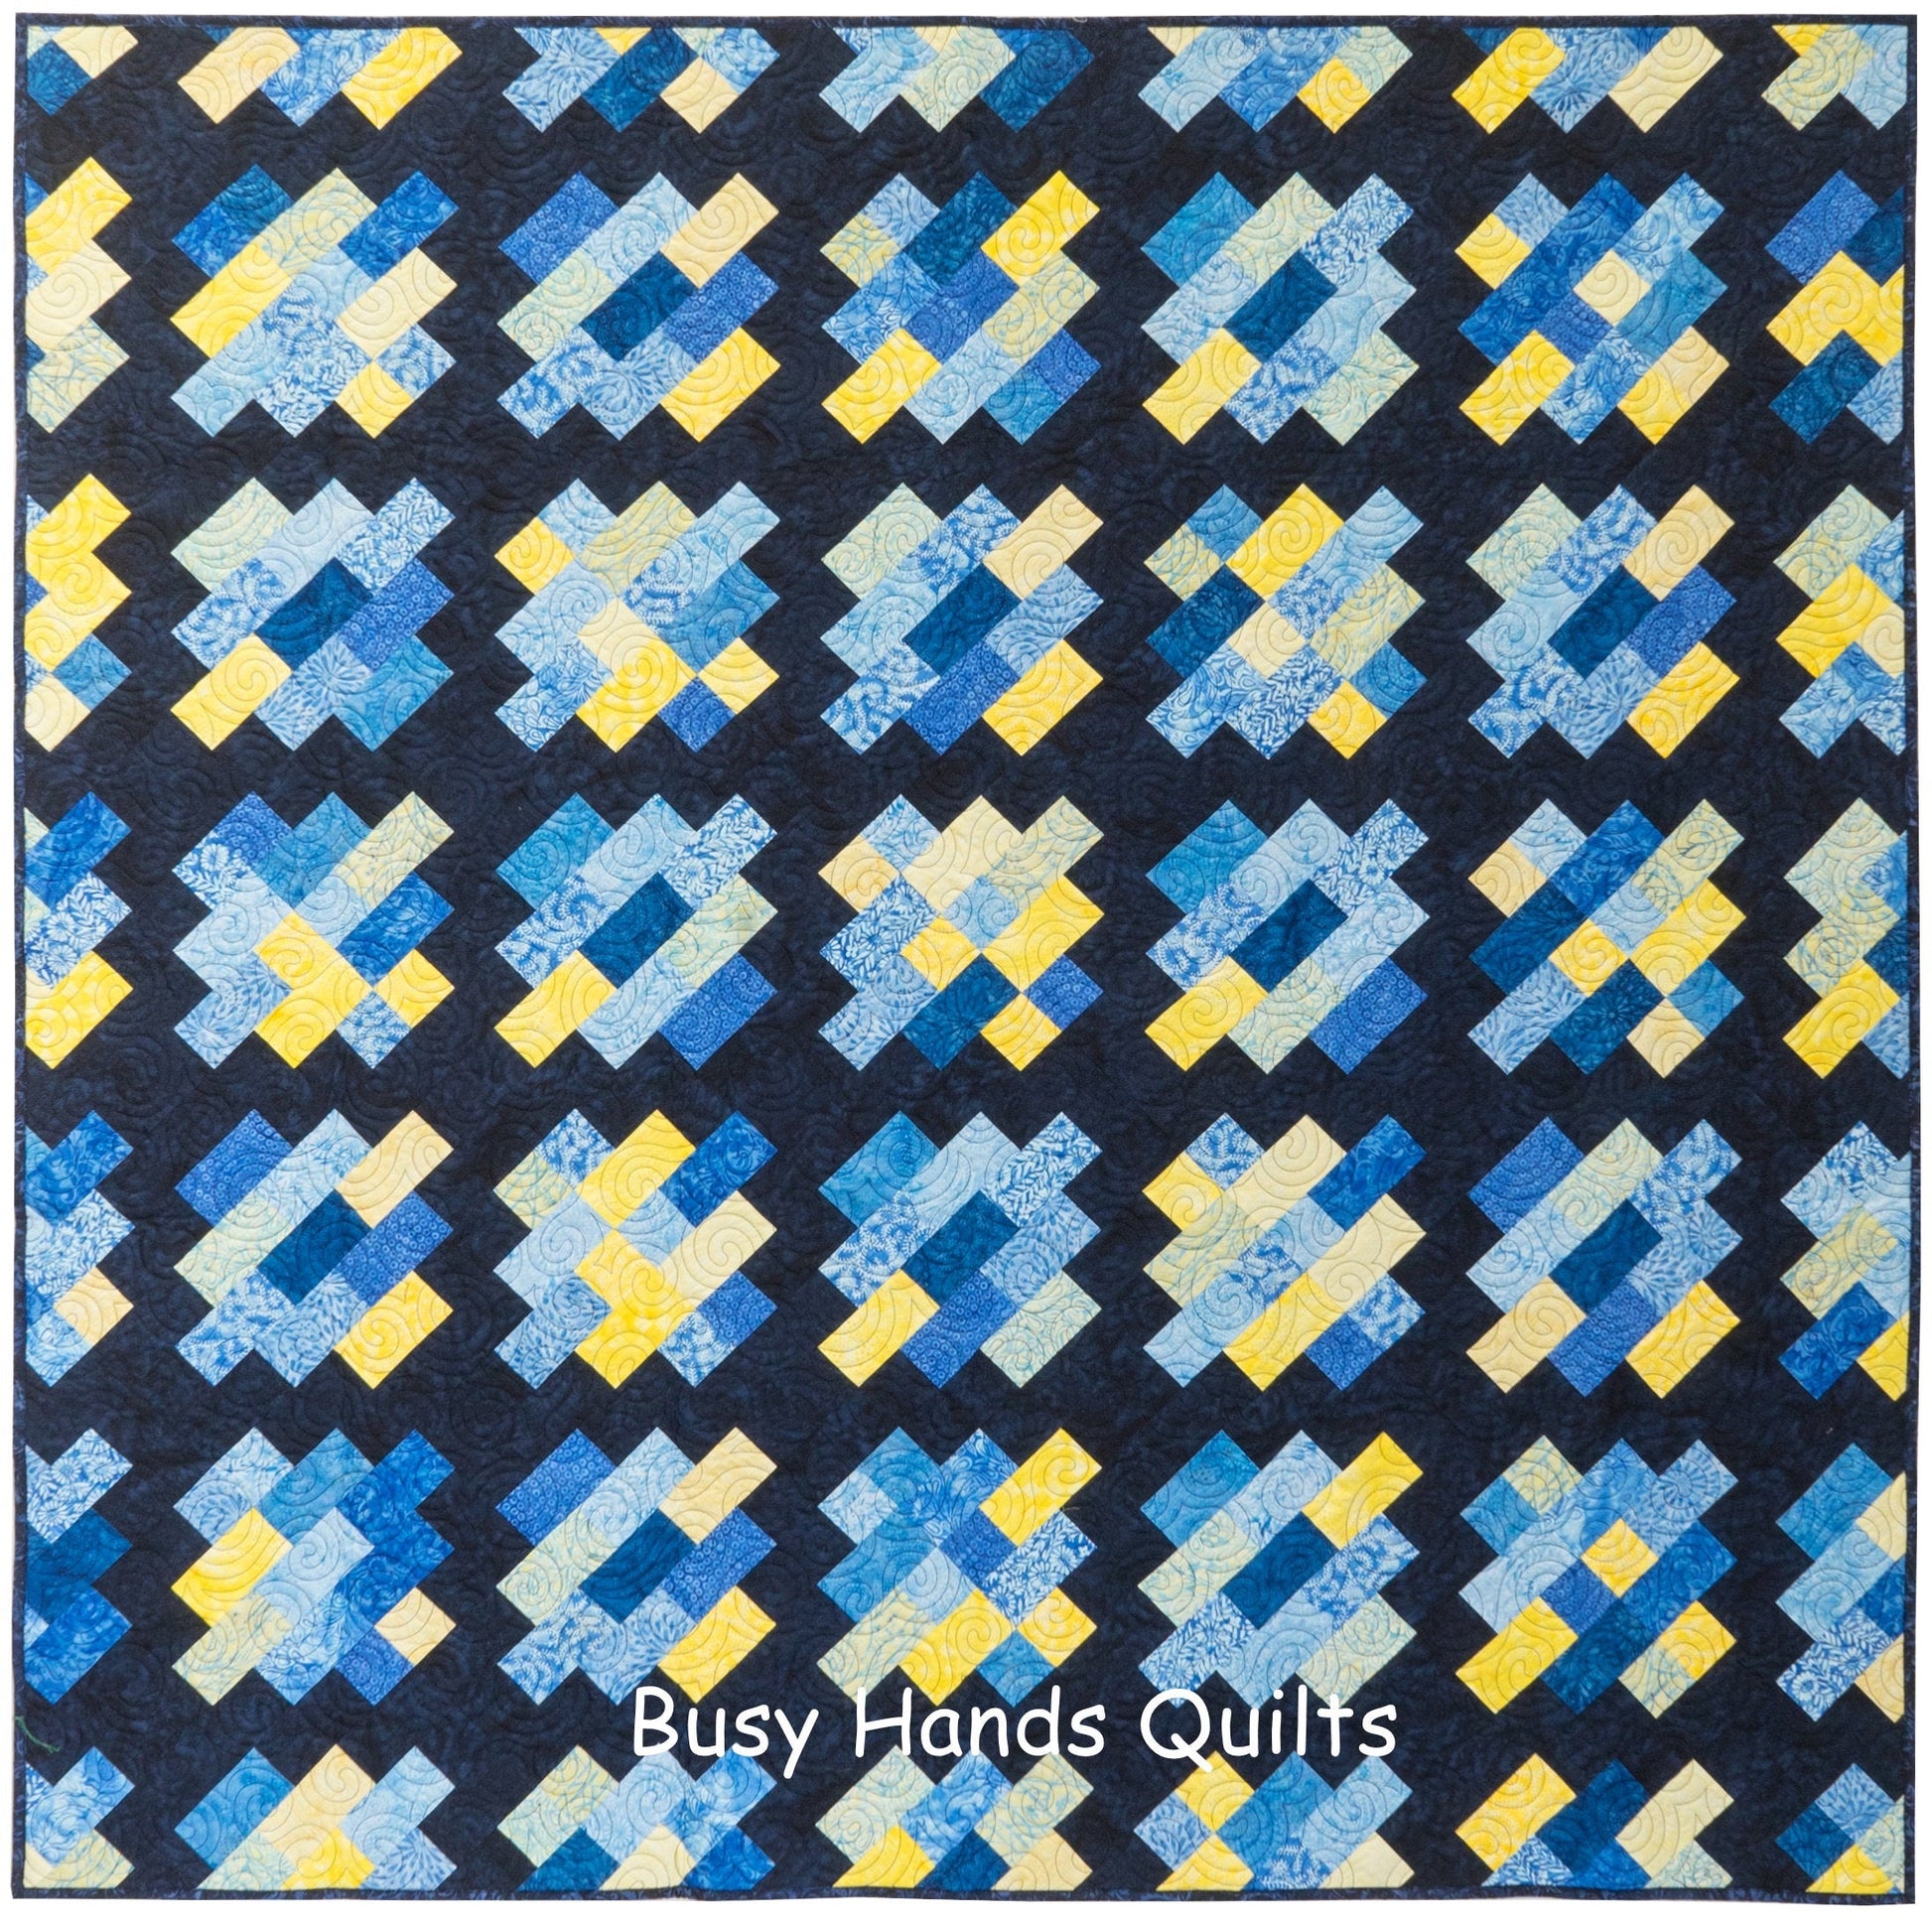 Boundless Beauty Quilt Pattern PDF DOWNLOAD Busy Hands Quilts $12.99